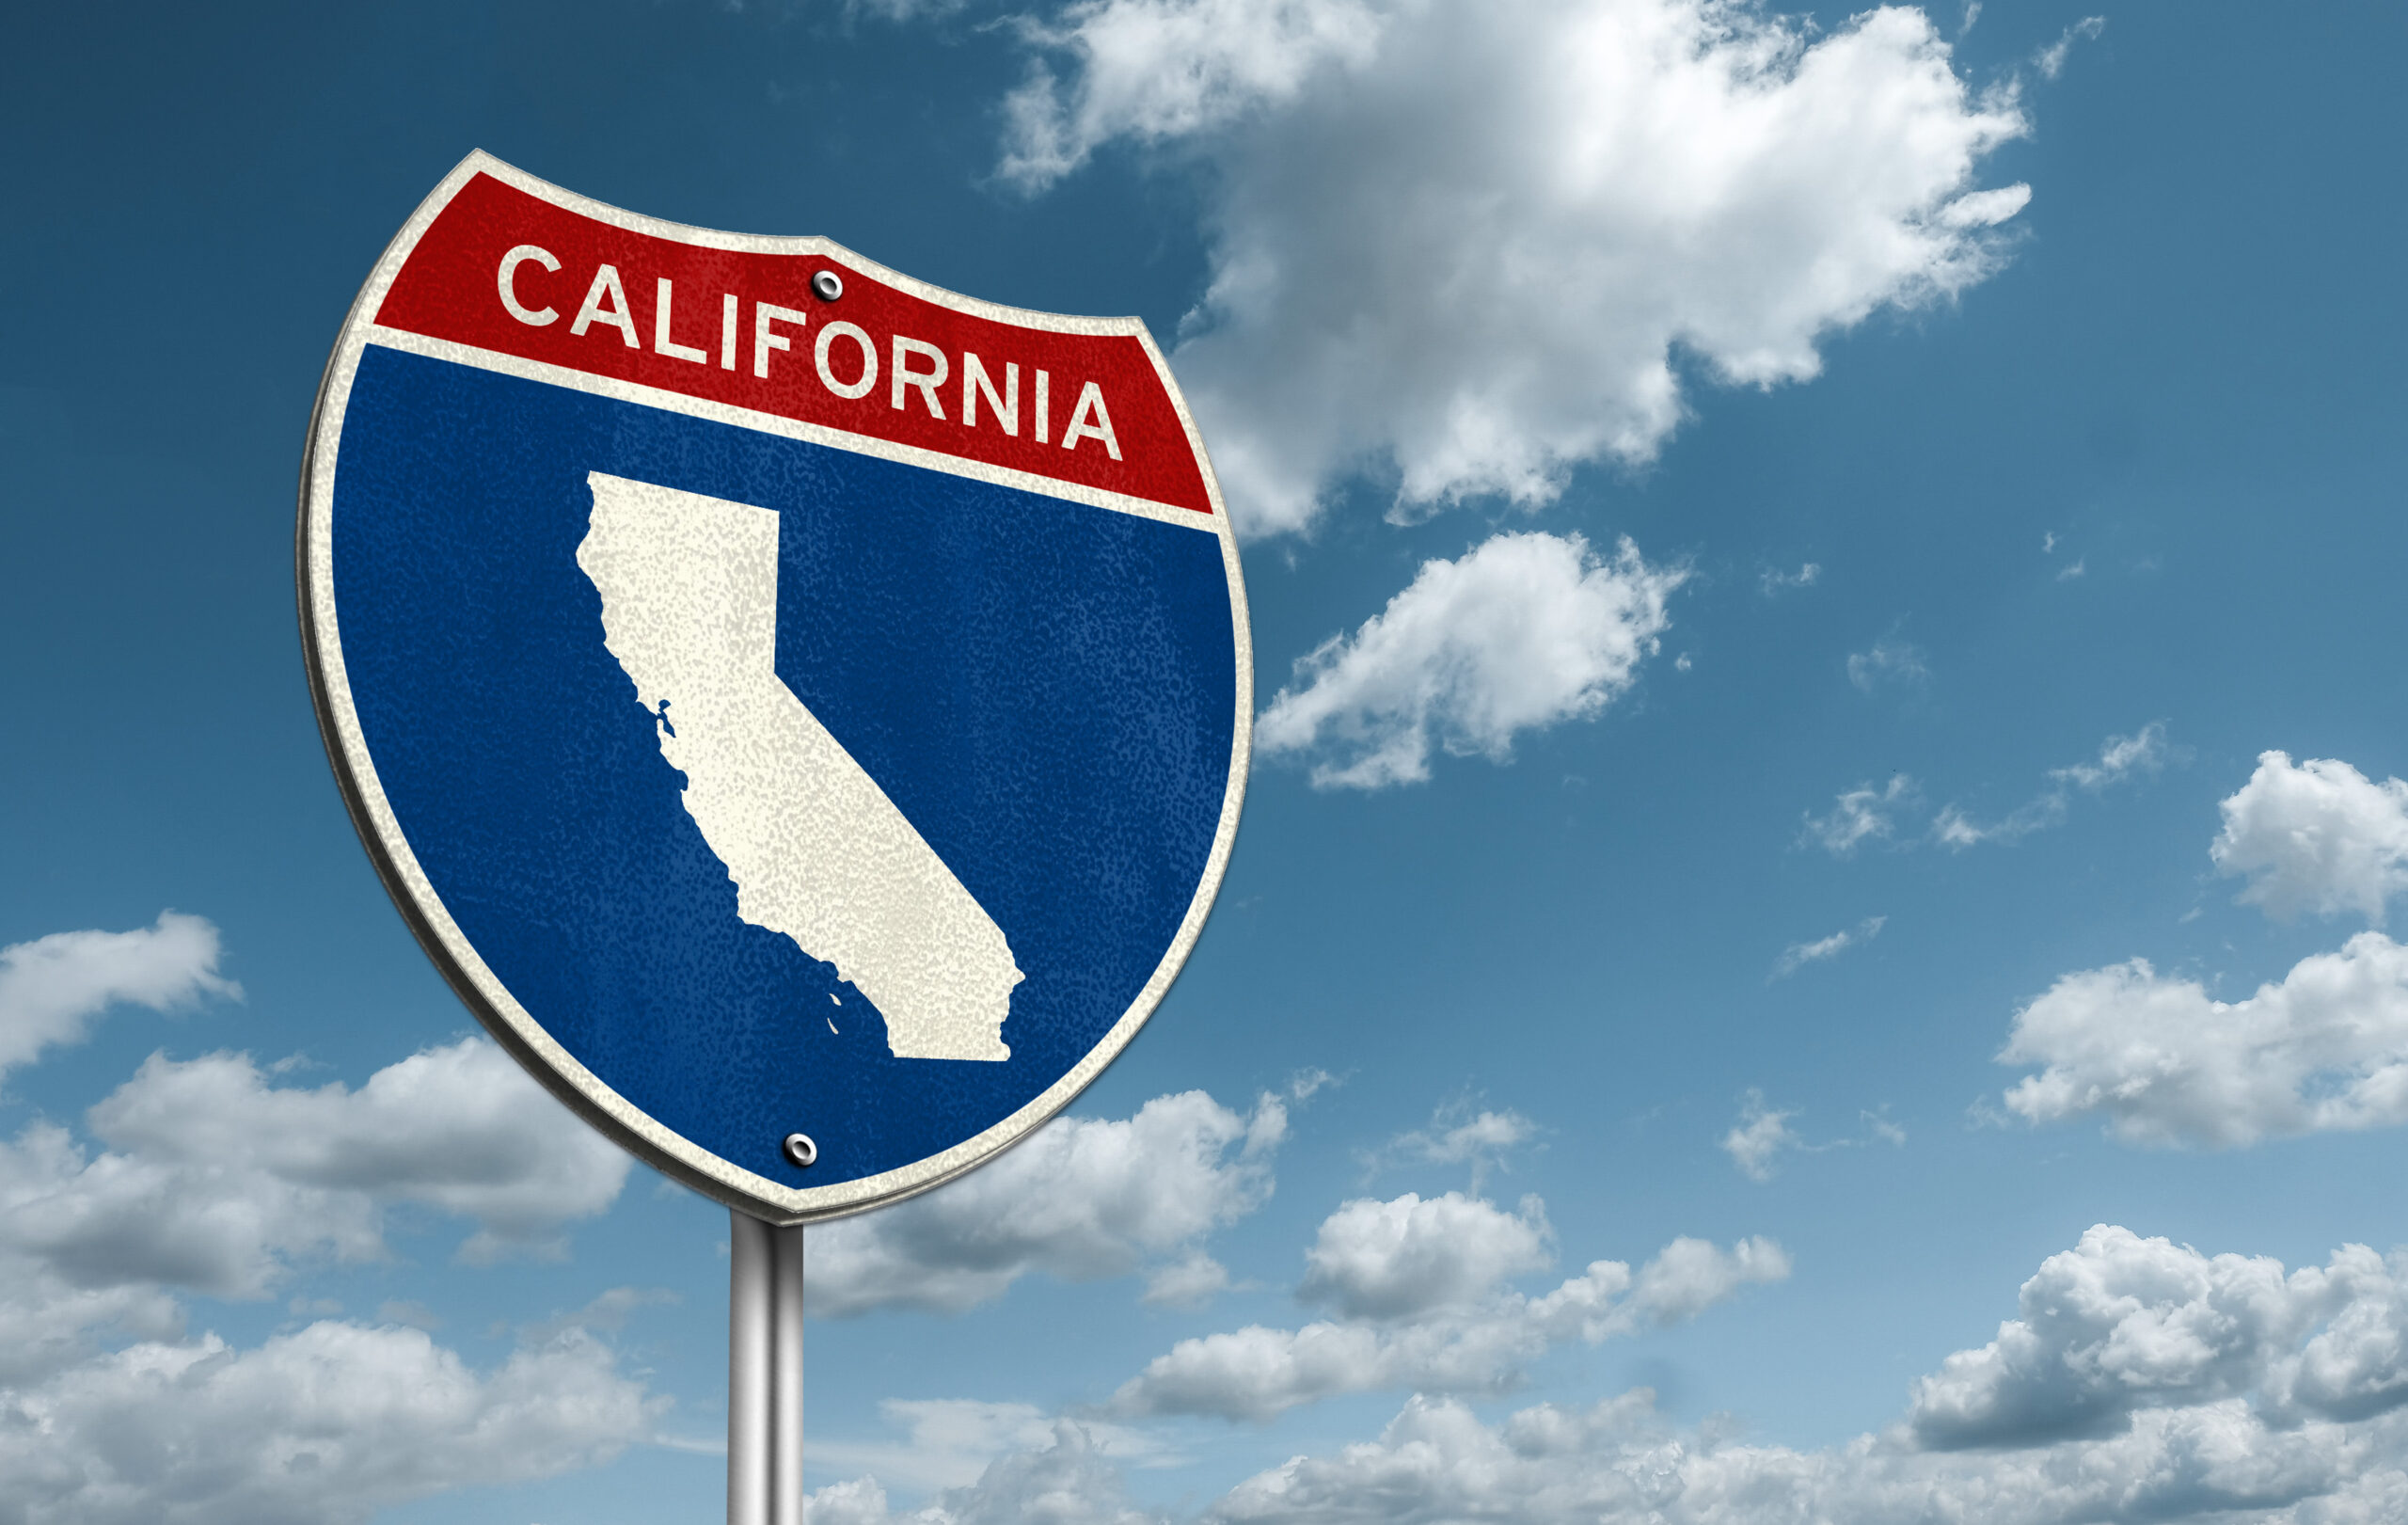 A road sign with the word "California" at the top in white text on a red background, above a white outline of the State on a blue background. Beyond the sign, is a blue sky with a spattering of clouds.